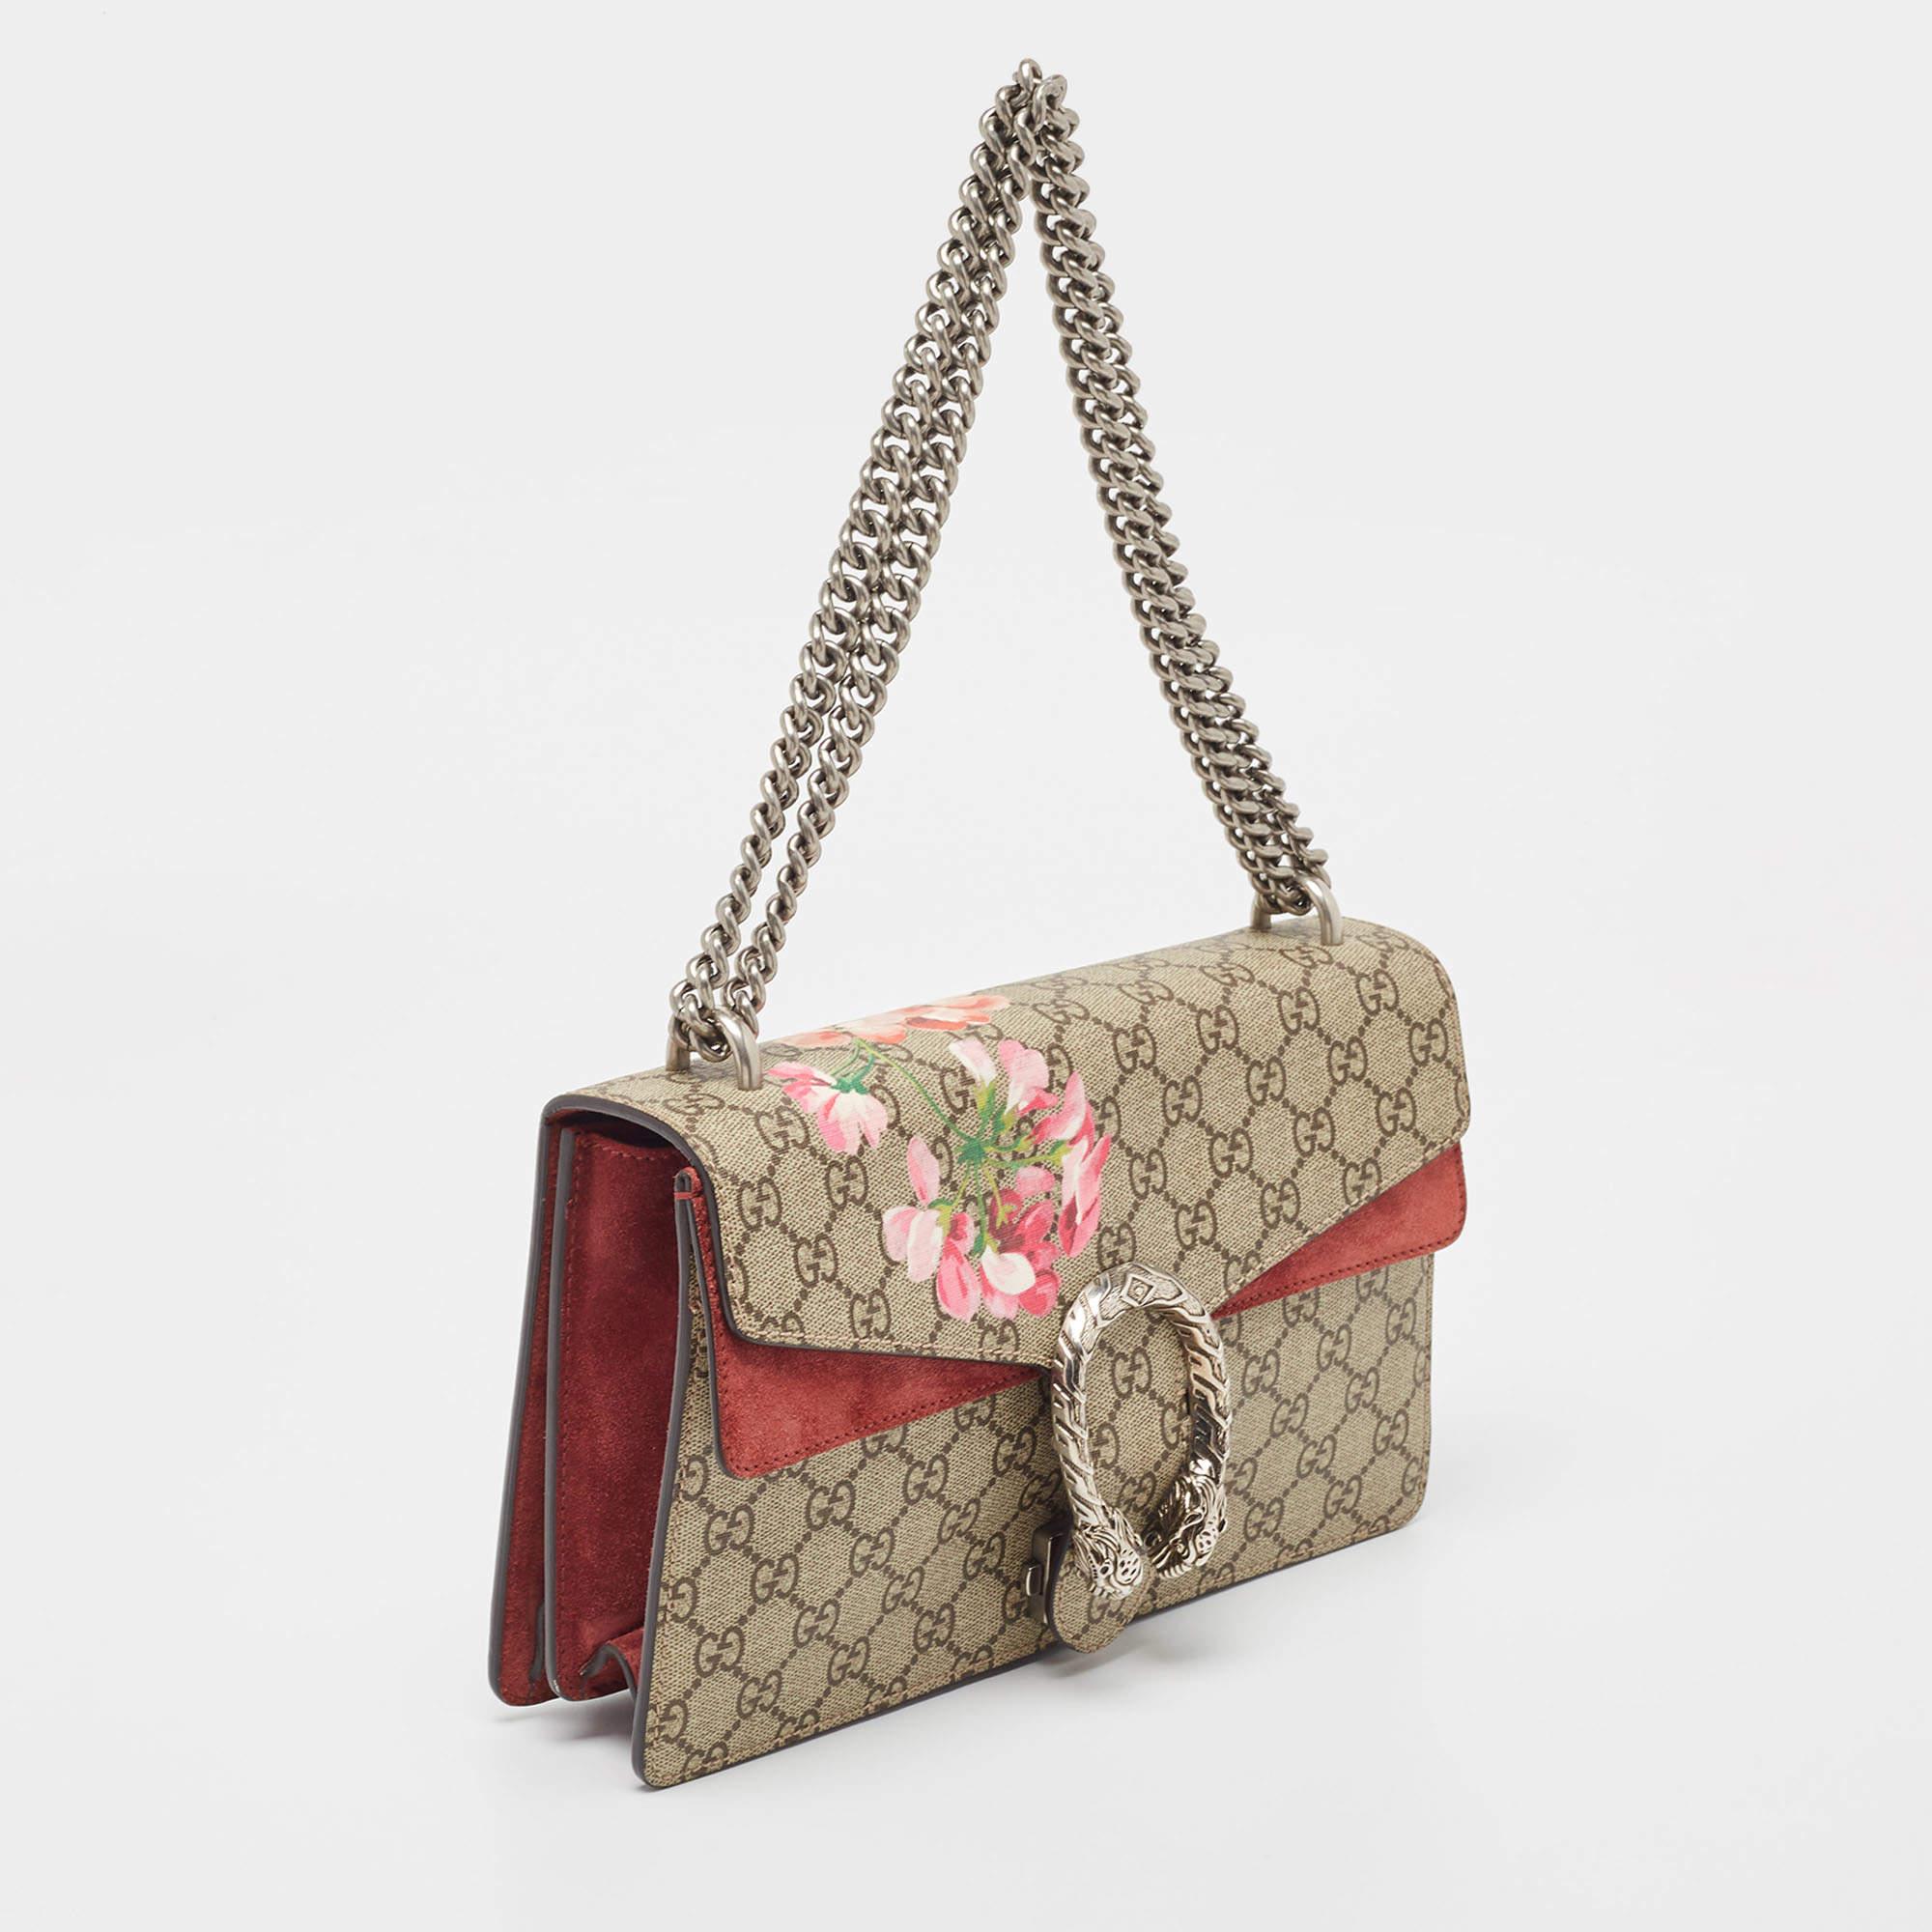 Gucci's Dionysus collection is inspired by the Greek God Dionysus, who is believed to have crossed the Tigris river on a tiger sent to him by Zeus. This creation has been made from leather and beautifully merges the tradition of the house with